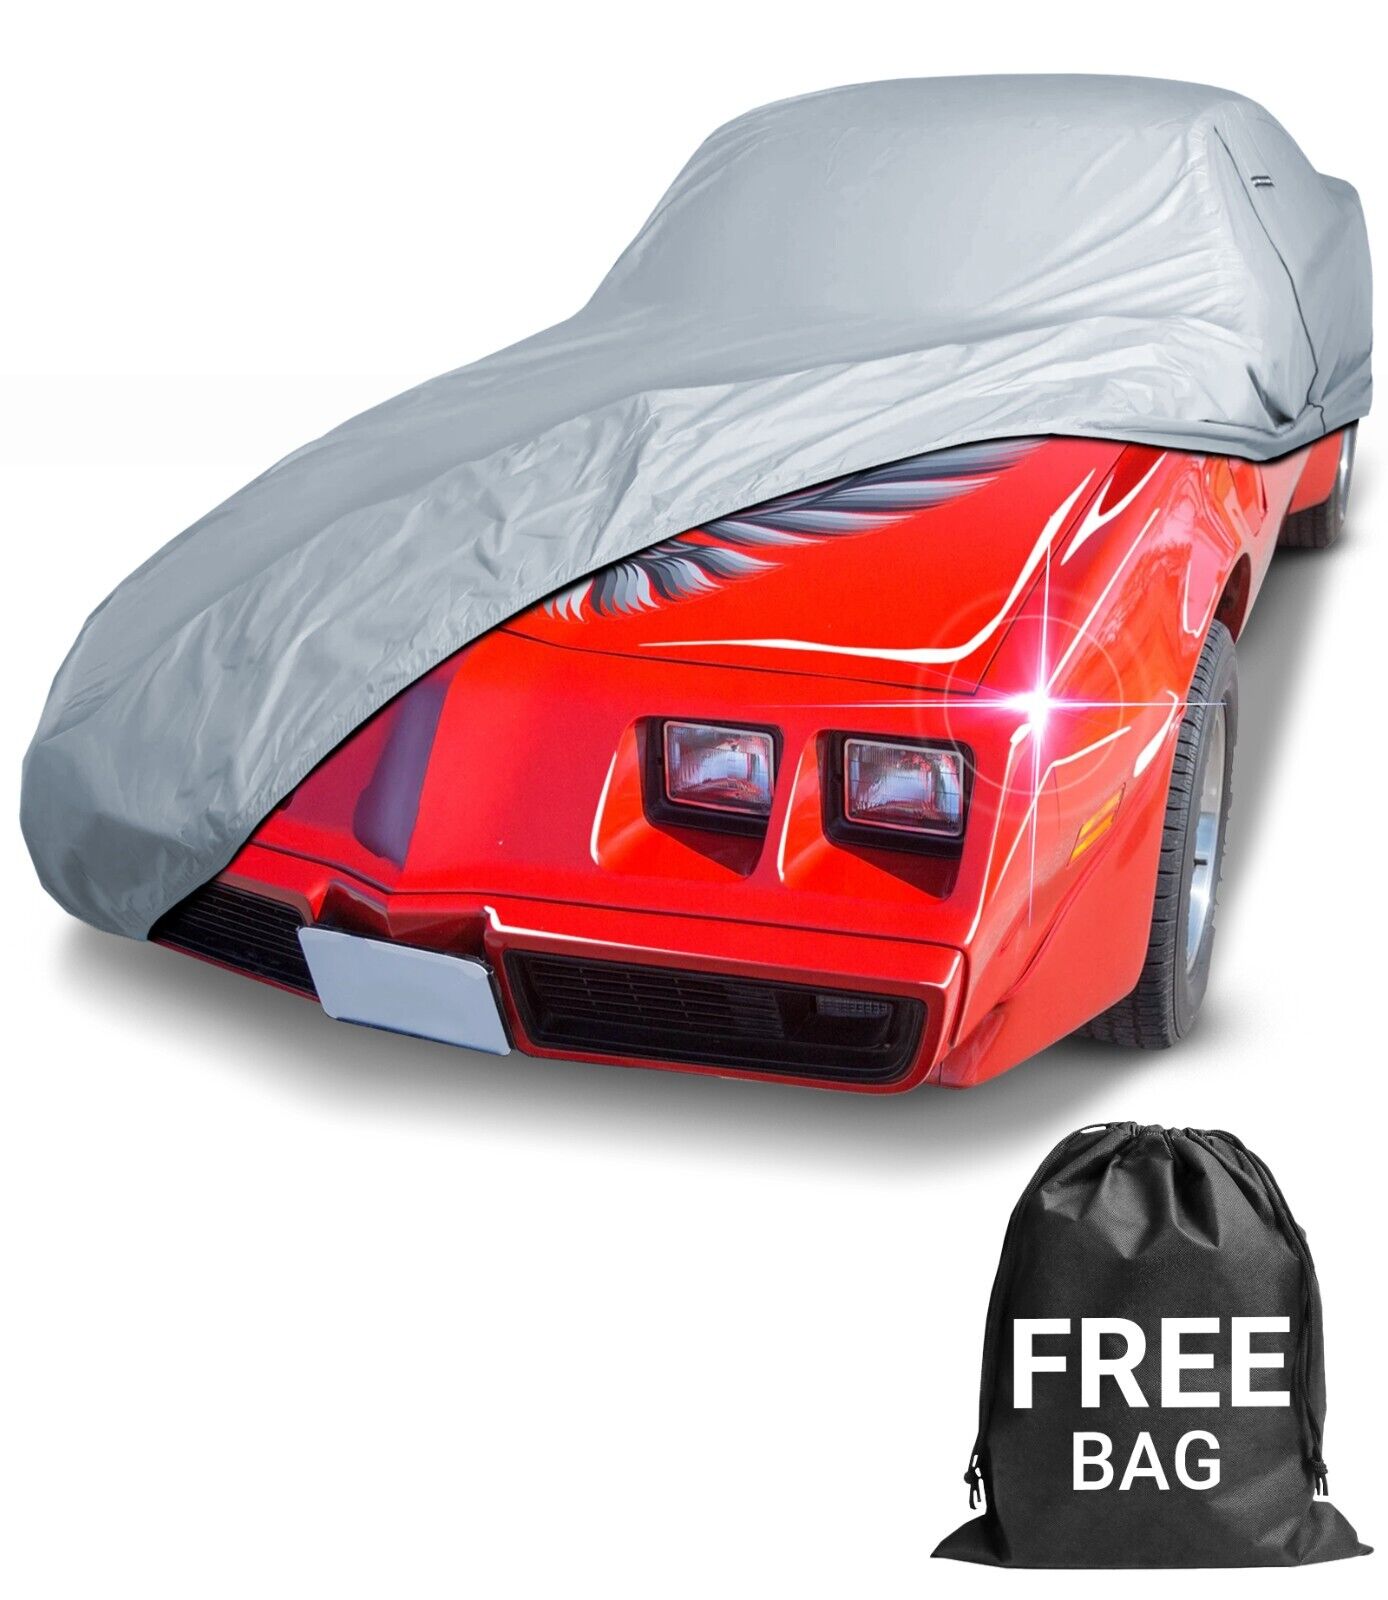 1974-1981 Pontiac Trans AM Custom Car Cover - All-Weather Waterproof Protection